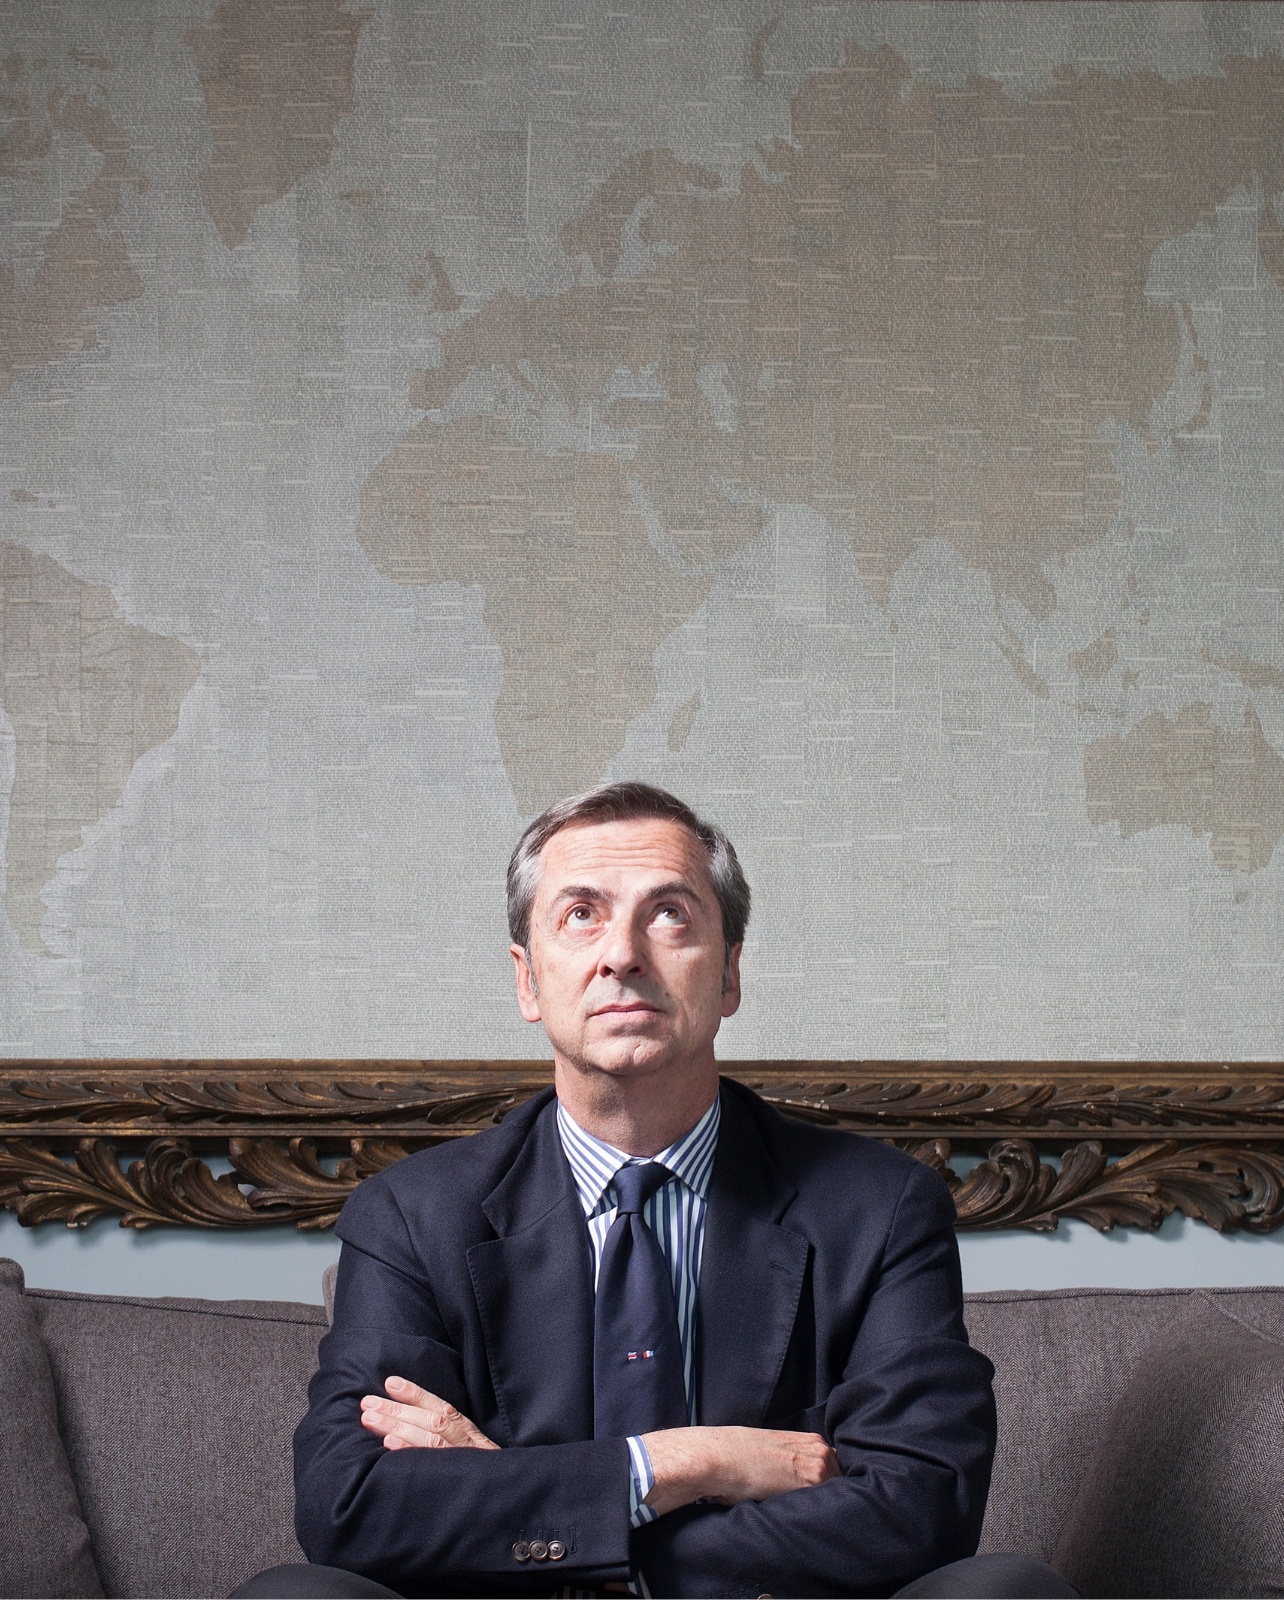 Portrait of president and CEO of Vhernier seated on a couch, looking up with arms crossed